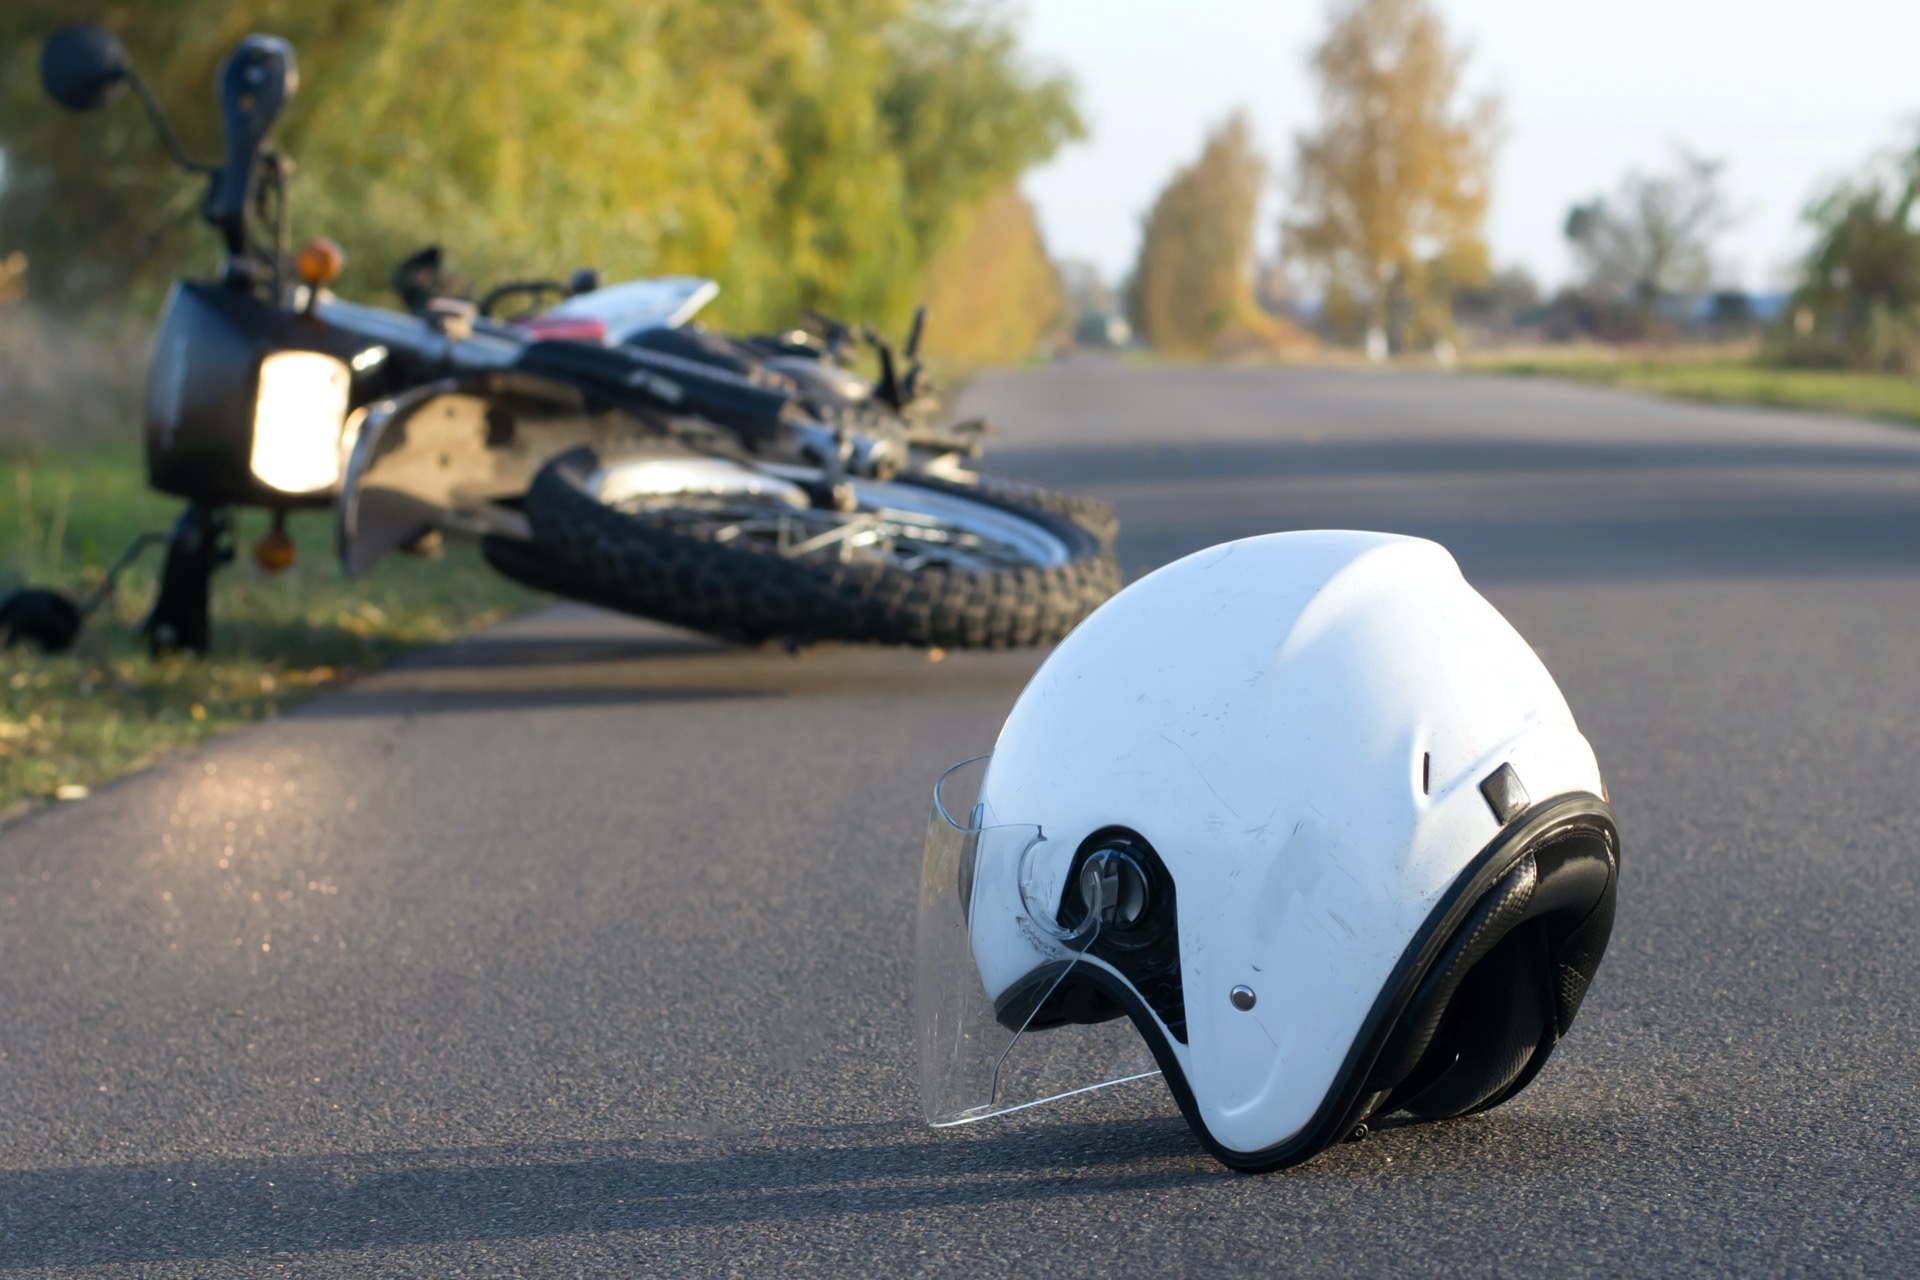 Photo of Motorcycle and Helmet on the Ground an Accident